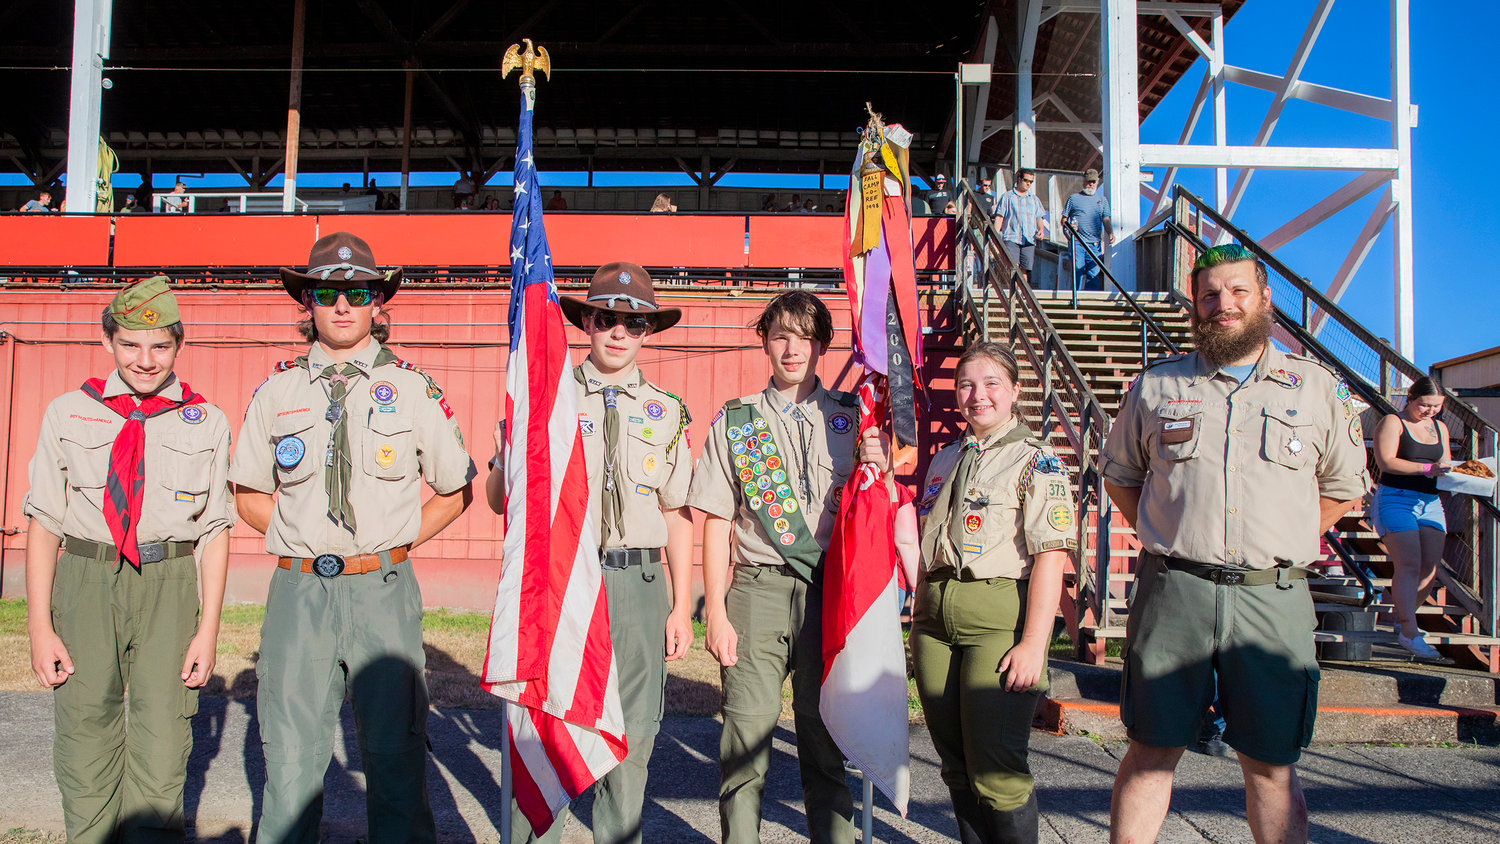 Scout Troop 373 was set to display flags at the Southwest Washington Fairgrounds before the derby was canceled Tuesday night in Centralia.